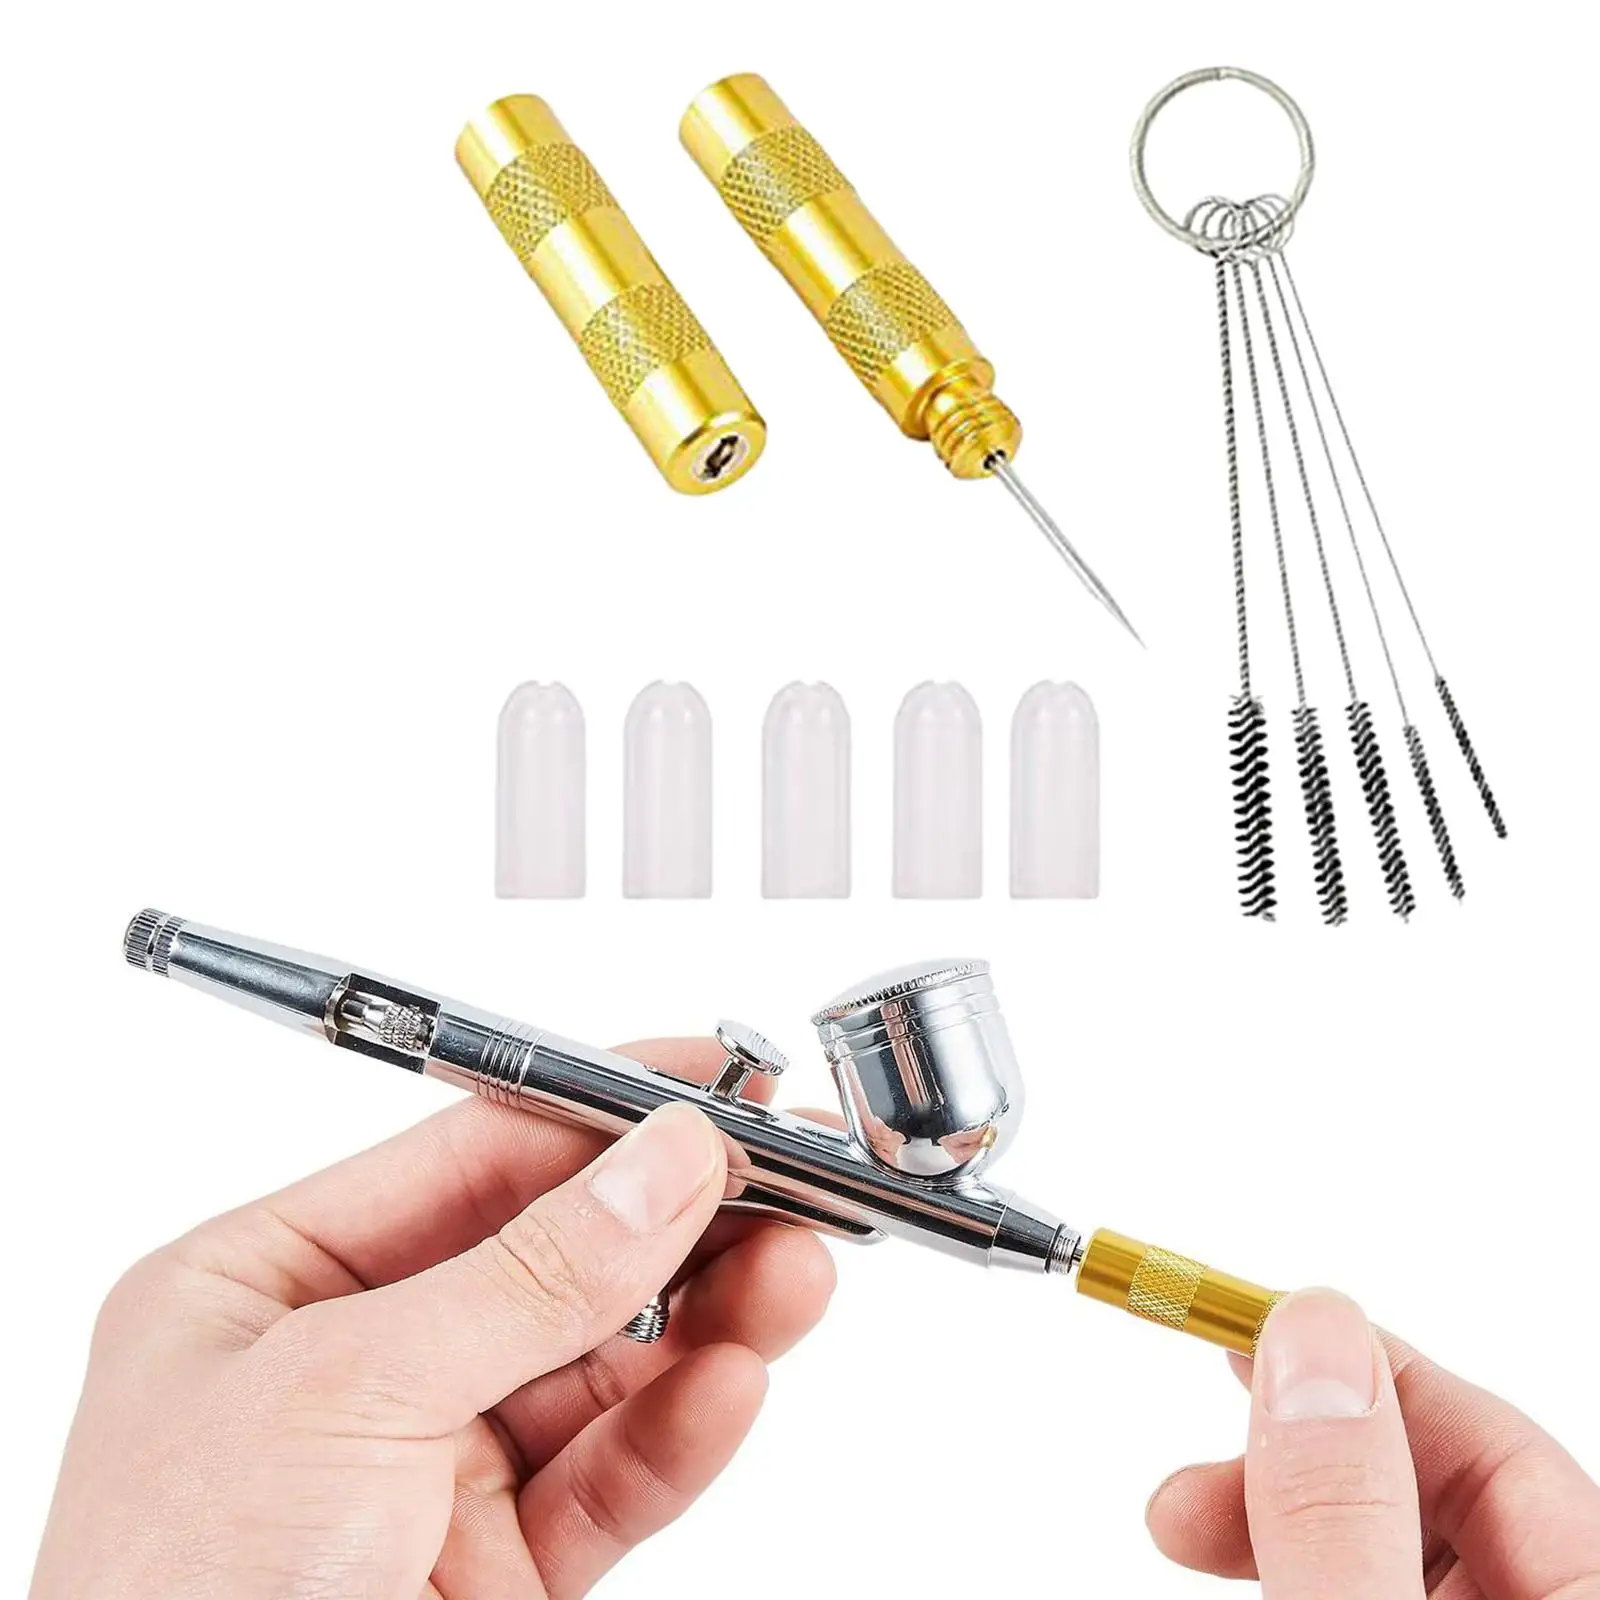 Airbrush Cleaning Repairing Set Easy to Use Airbrush Painting Supplies Professional Cleaner Portable Spray Gun Painting Supplies